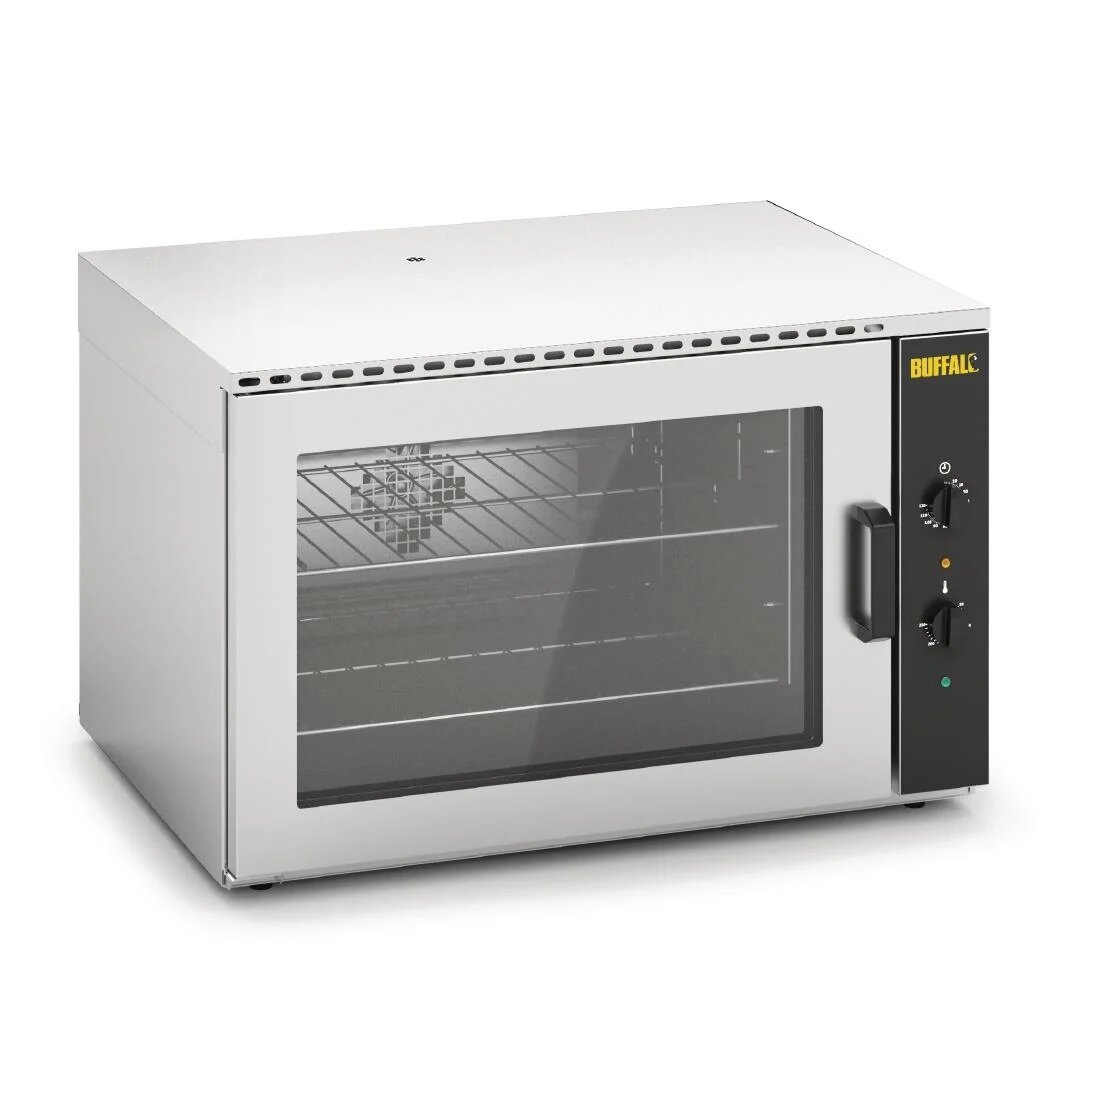 Buffalo CW864 Convection Oven with a 4 x 1/1 GN Capacity